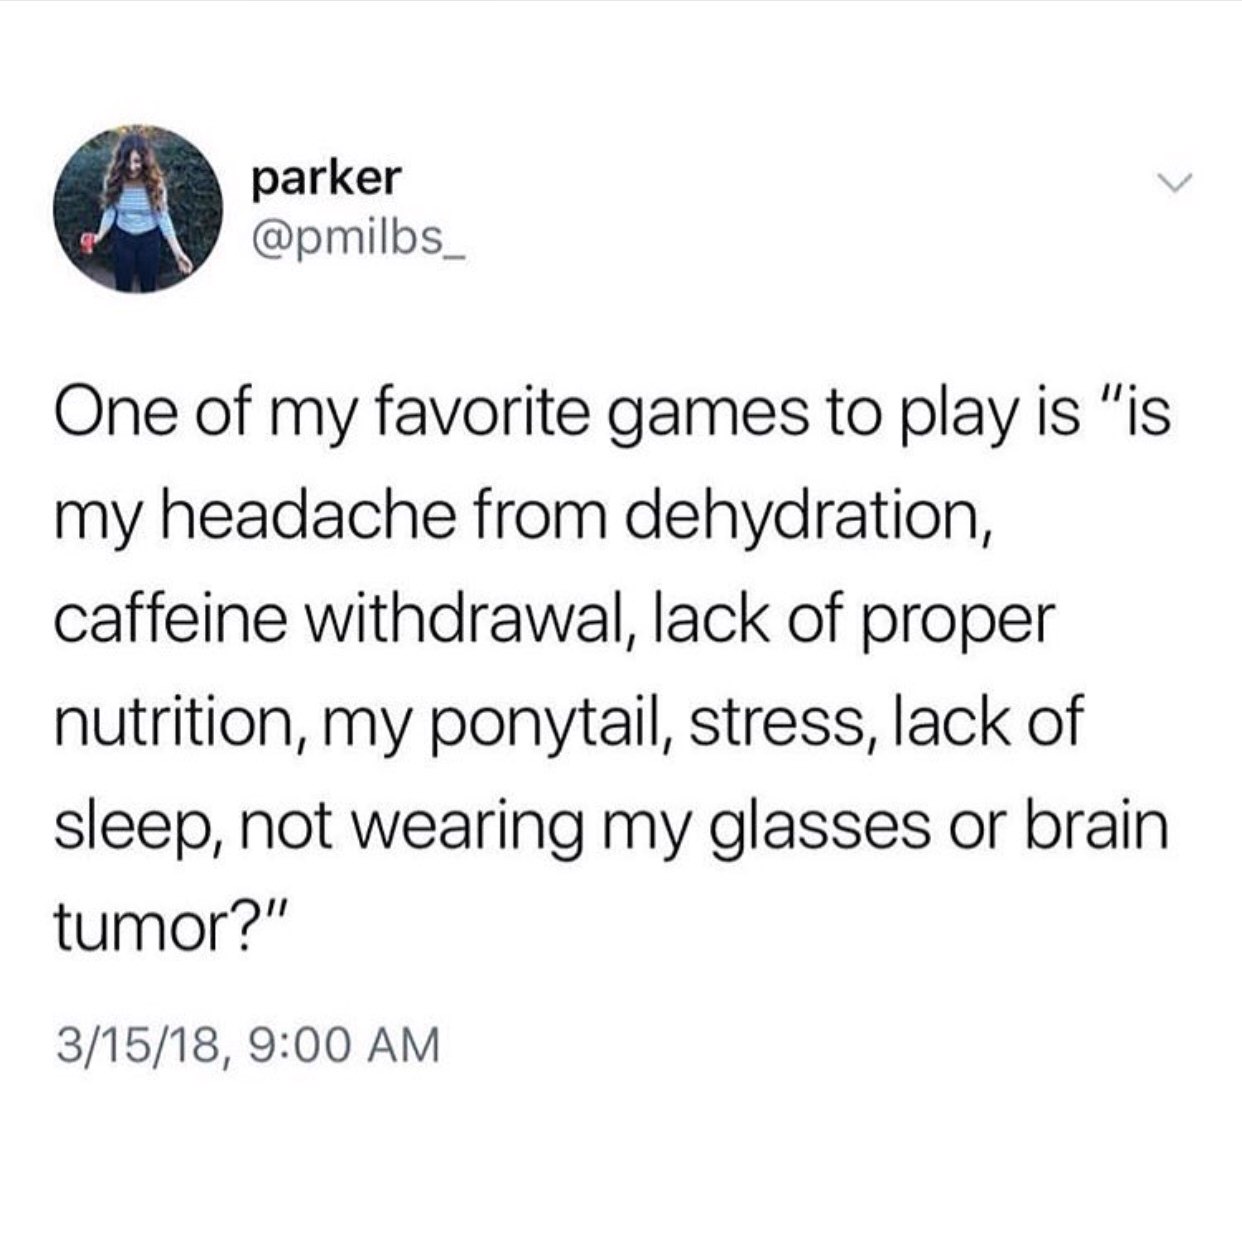 dank meme - angle - parker One of my favorite games to play is "is my headache from dehydration, caffeine withdrawal, lack of proper nutrition, my ponytail, stress, lack of sleep, not wearing my glasses or brain tumor?" 31518,